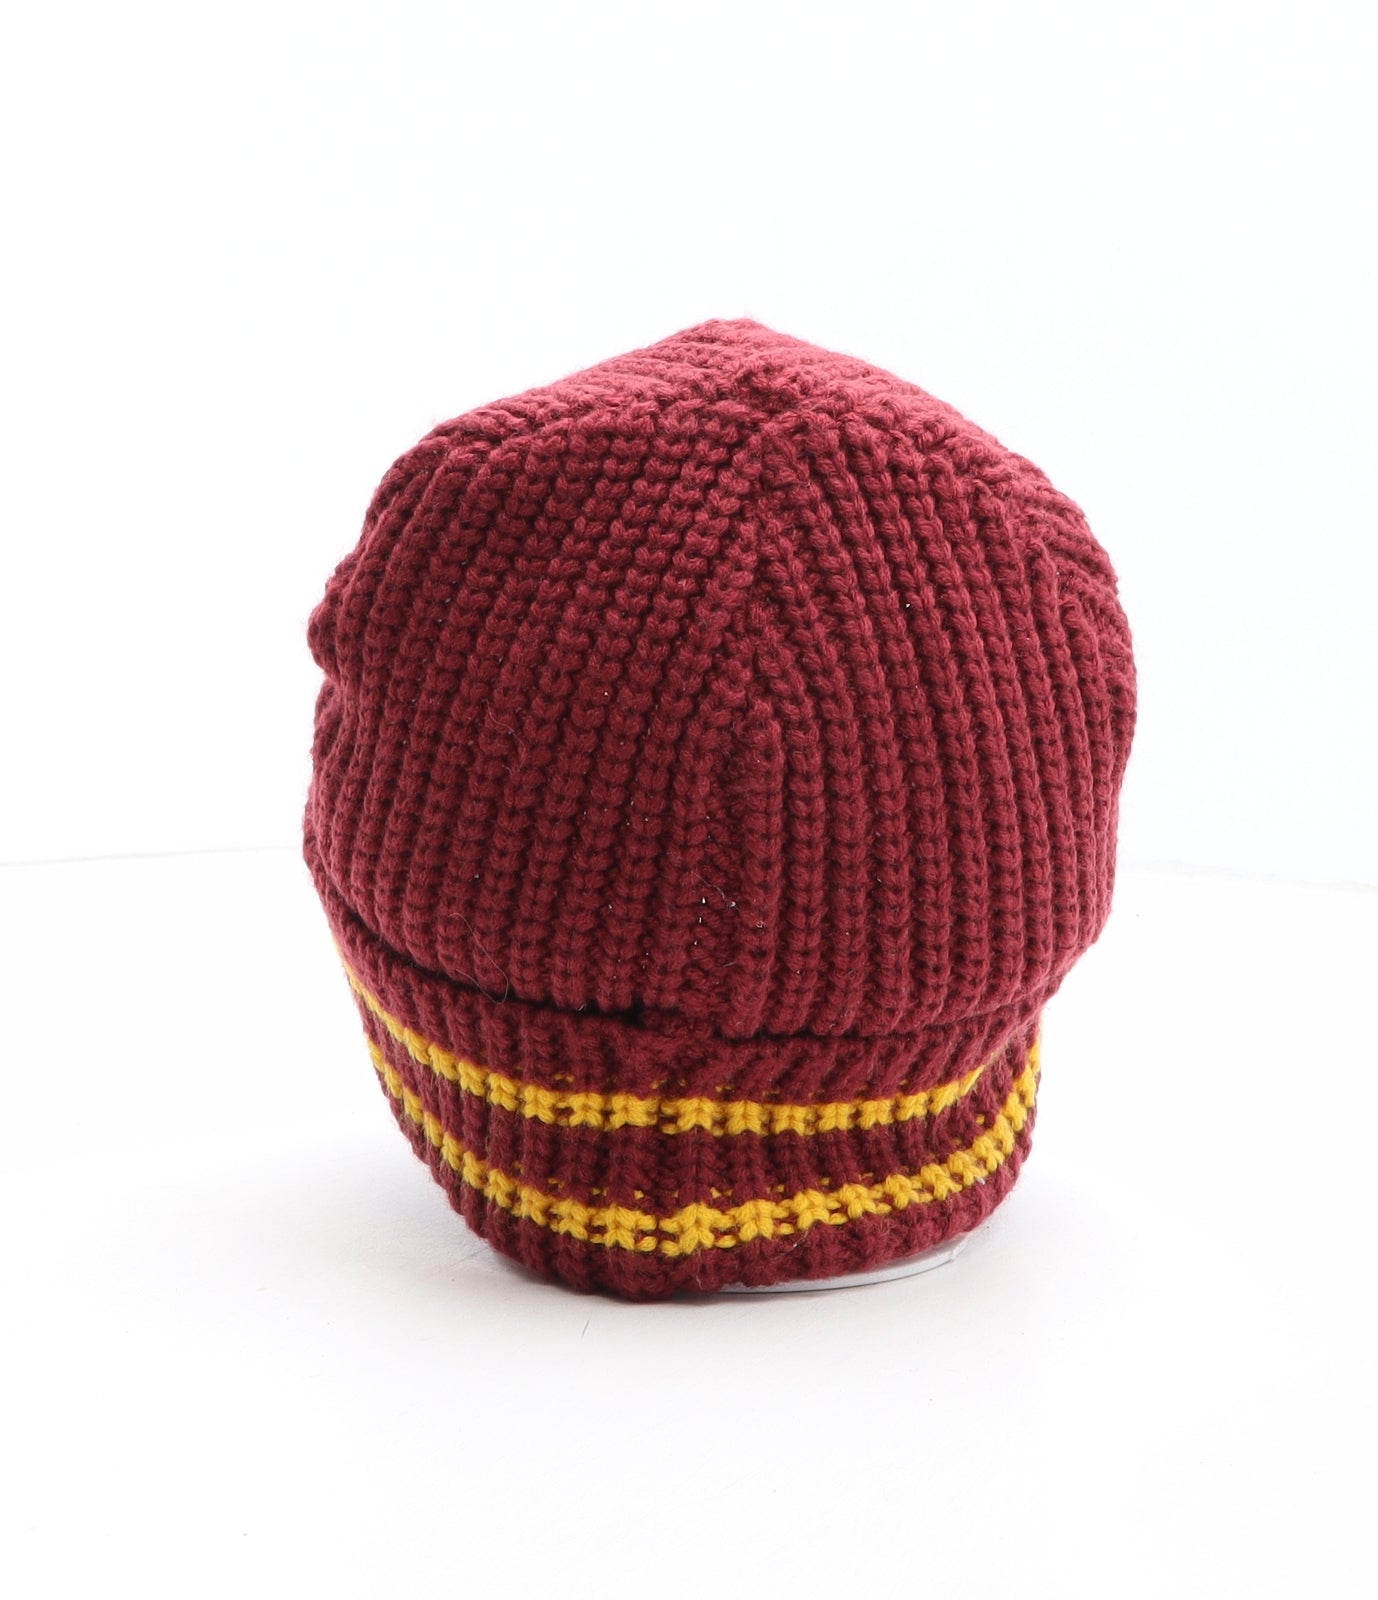 Primark Mens Red Striped Acrylic Beanie One Size - Harry Potter, Hogwarts, Gryffindor